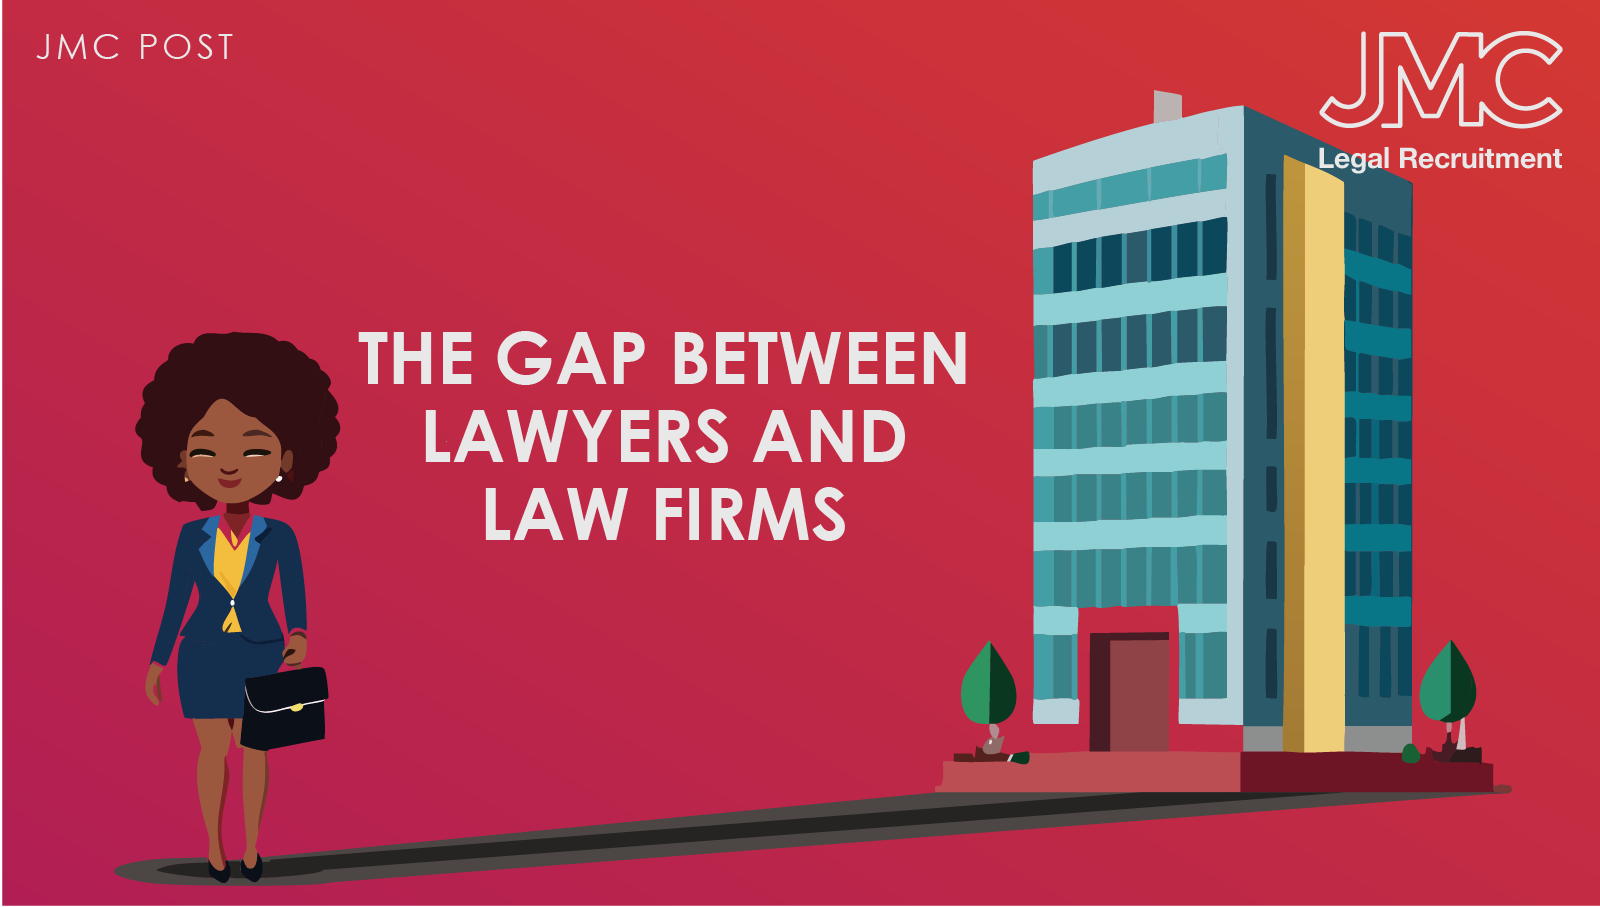 The Gap Between Lawyers and Law Firms